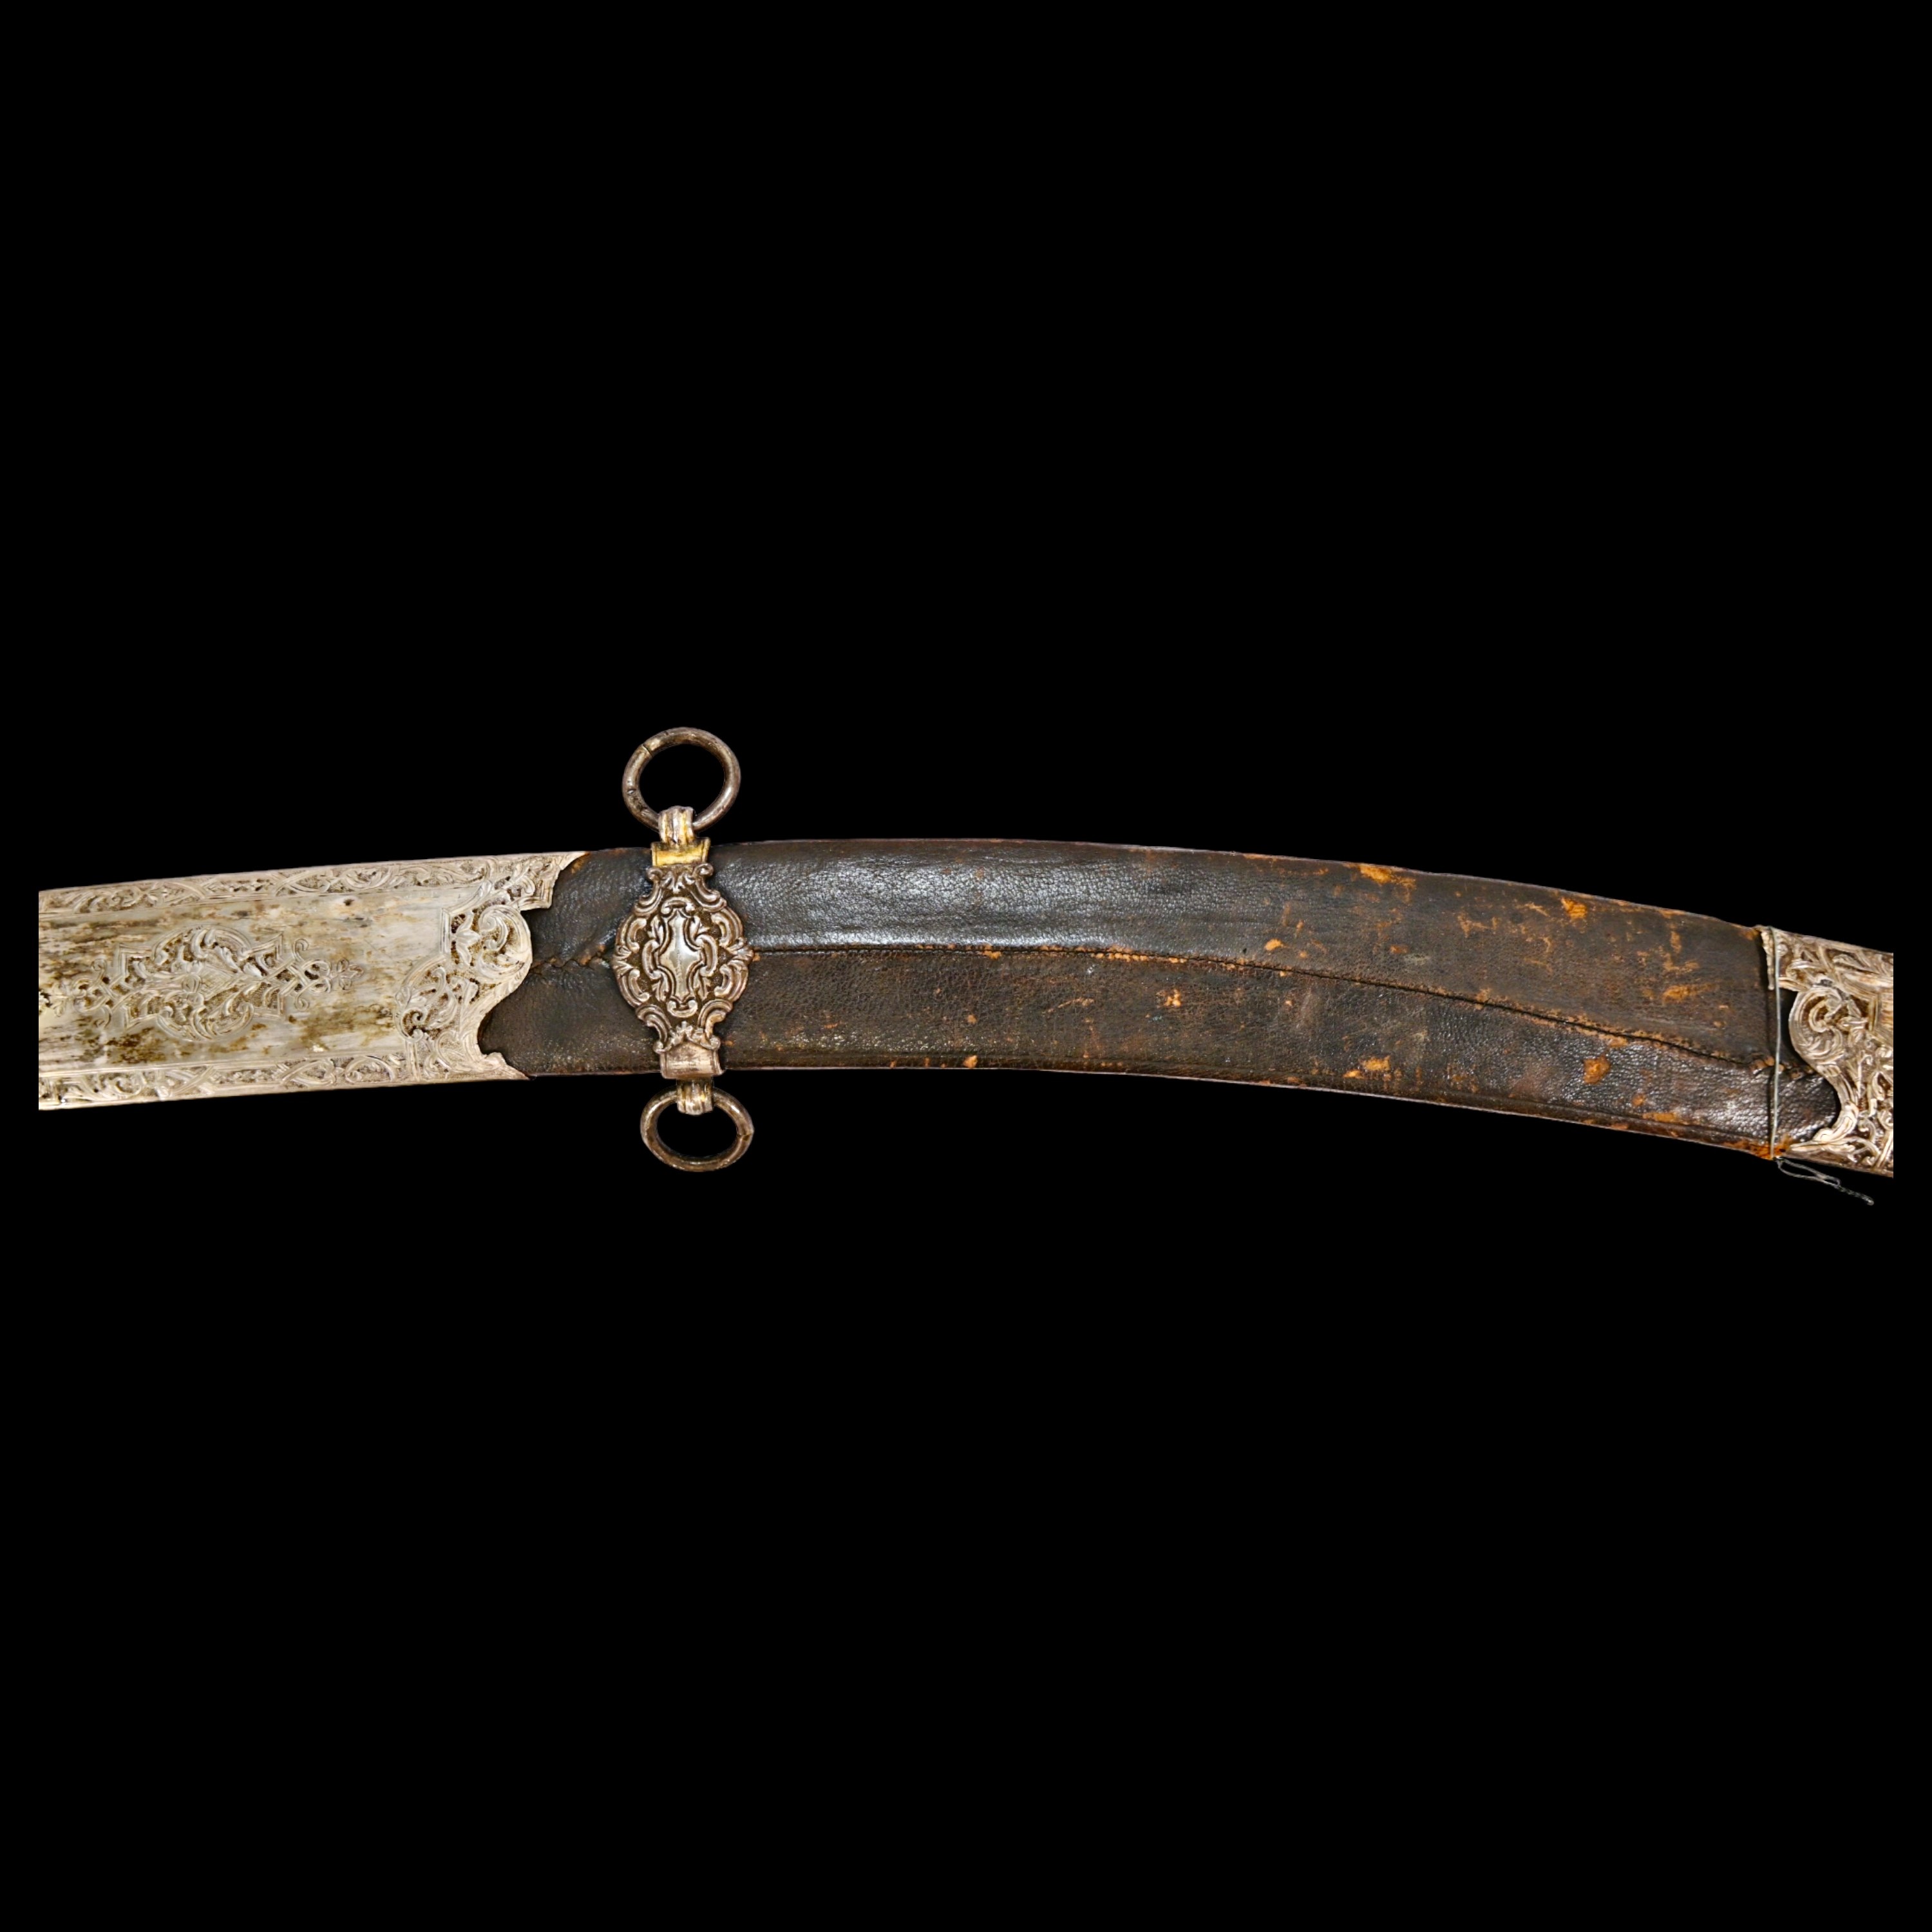 Rare Ottoman saber KARABELA, wootz blade, silver with the tugra of Sultan Ahmed III, early 18th C. - Image 8 of 27